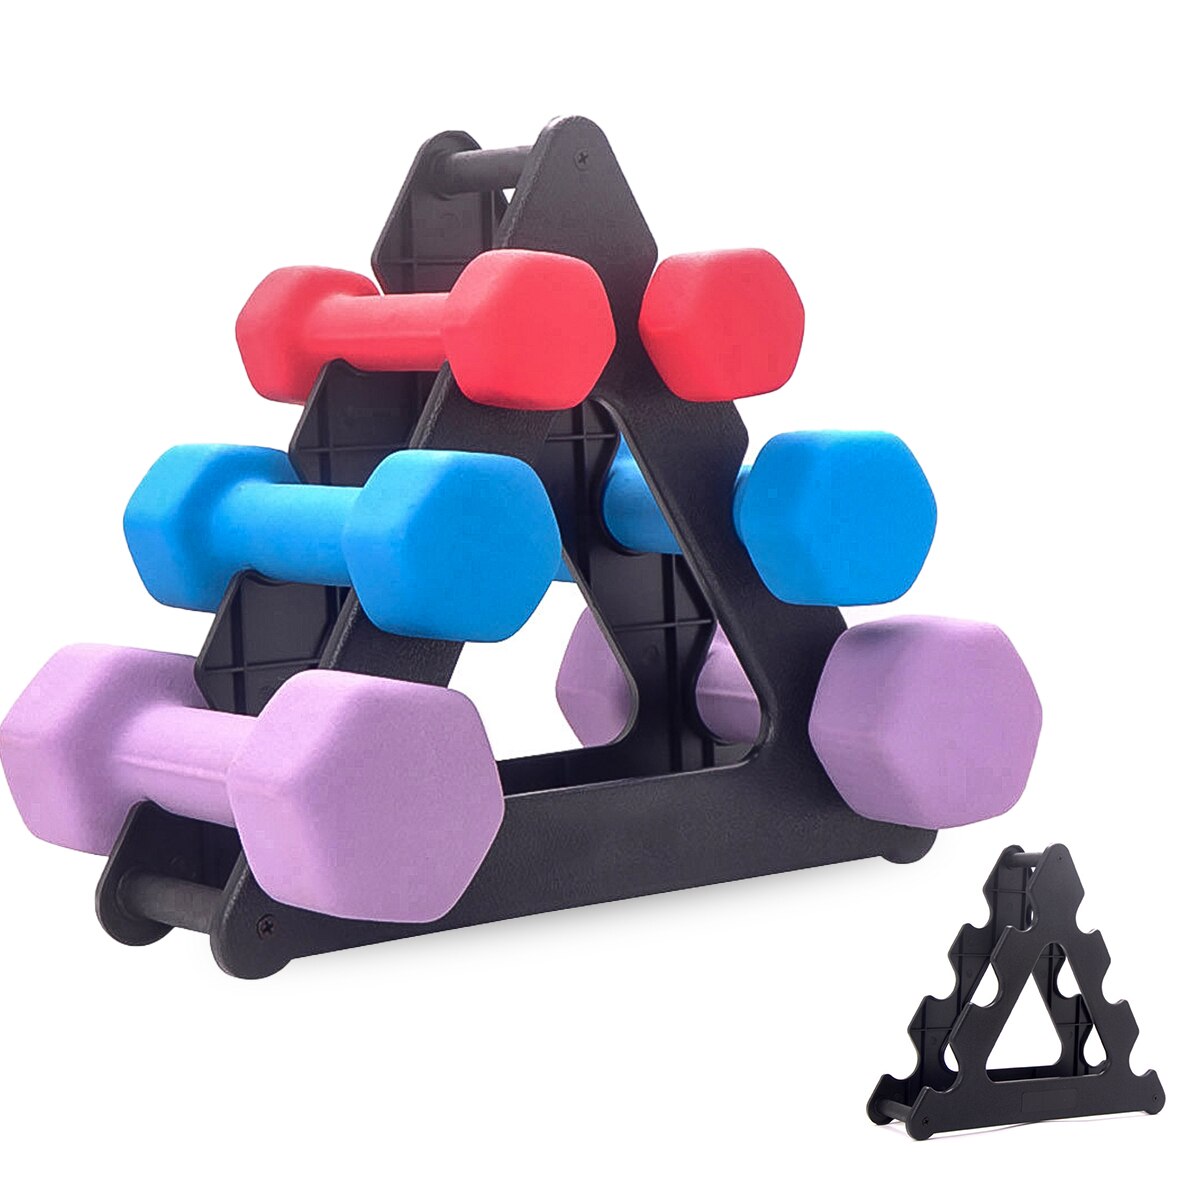 Dumbbell Storage Rack Stand 3-layer Hand-held Dumbbell Storage Rack For Home Office Gym Sport Exercise Accessories: Blue